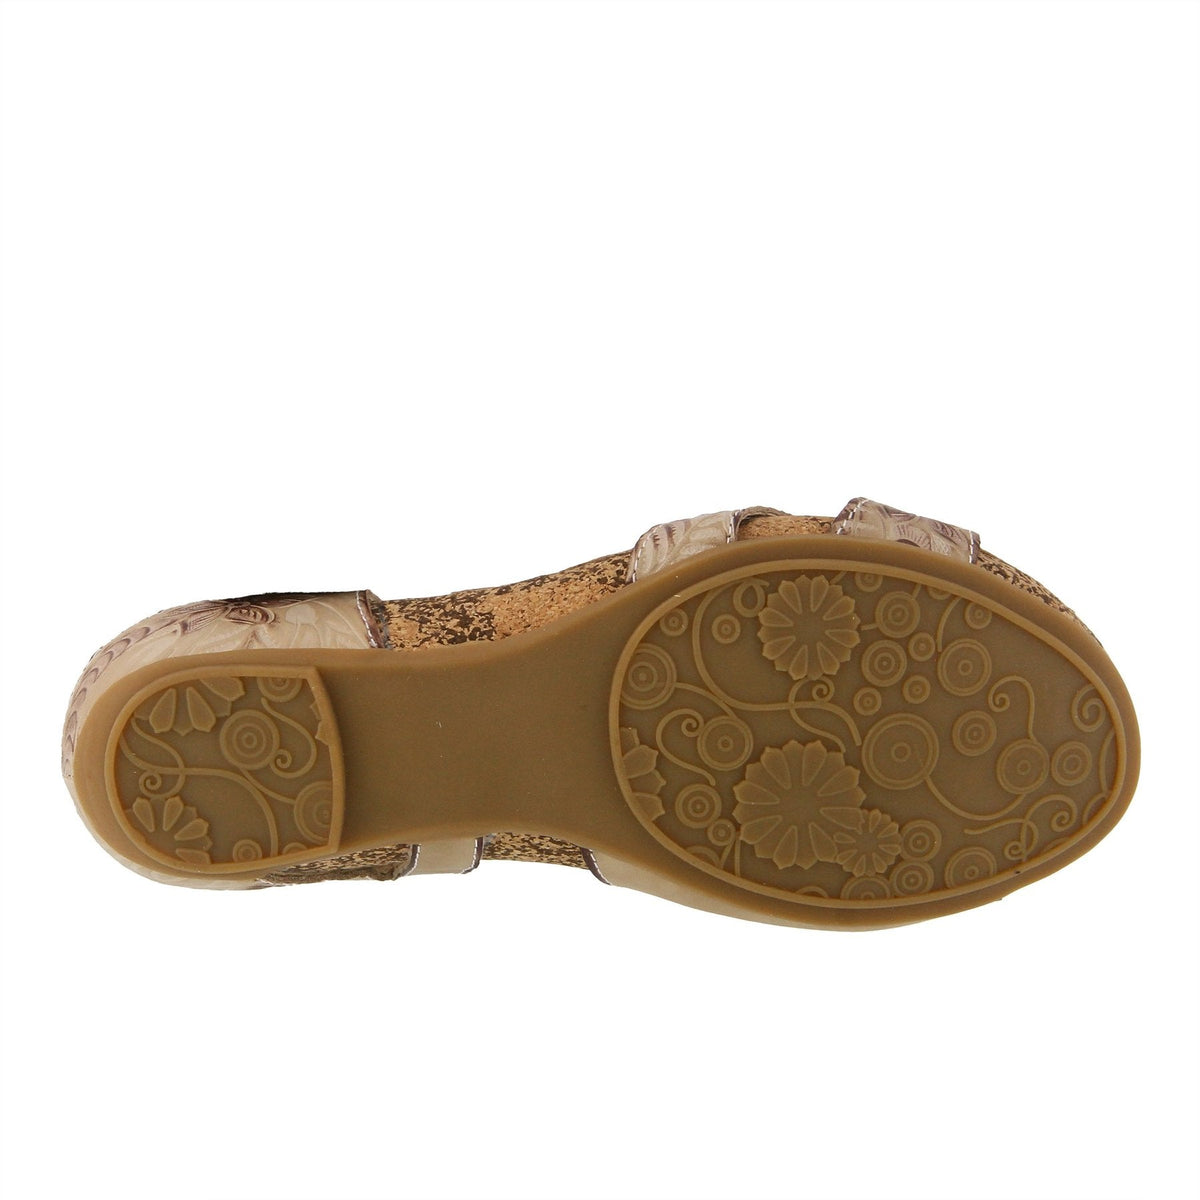 Our L'Artiste Quilana hand-painted asymmetrical leather sandal has an earthy embossed floral design adorned with antiqued metal buttons for an artsy easy look.